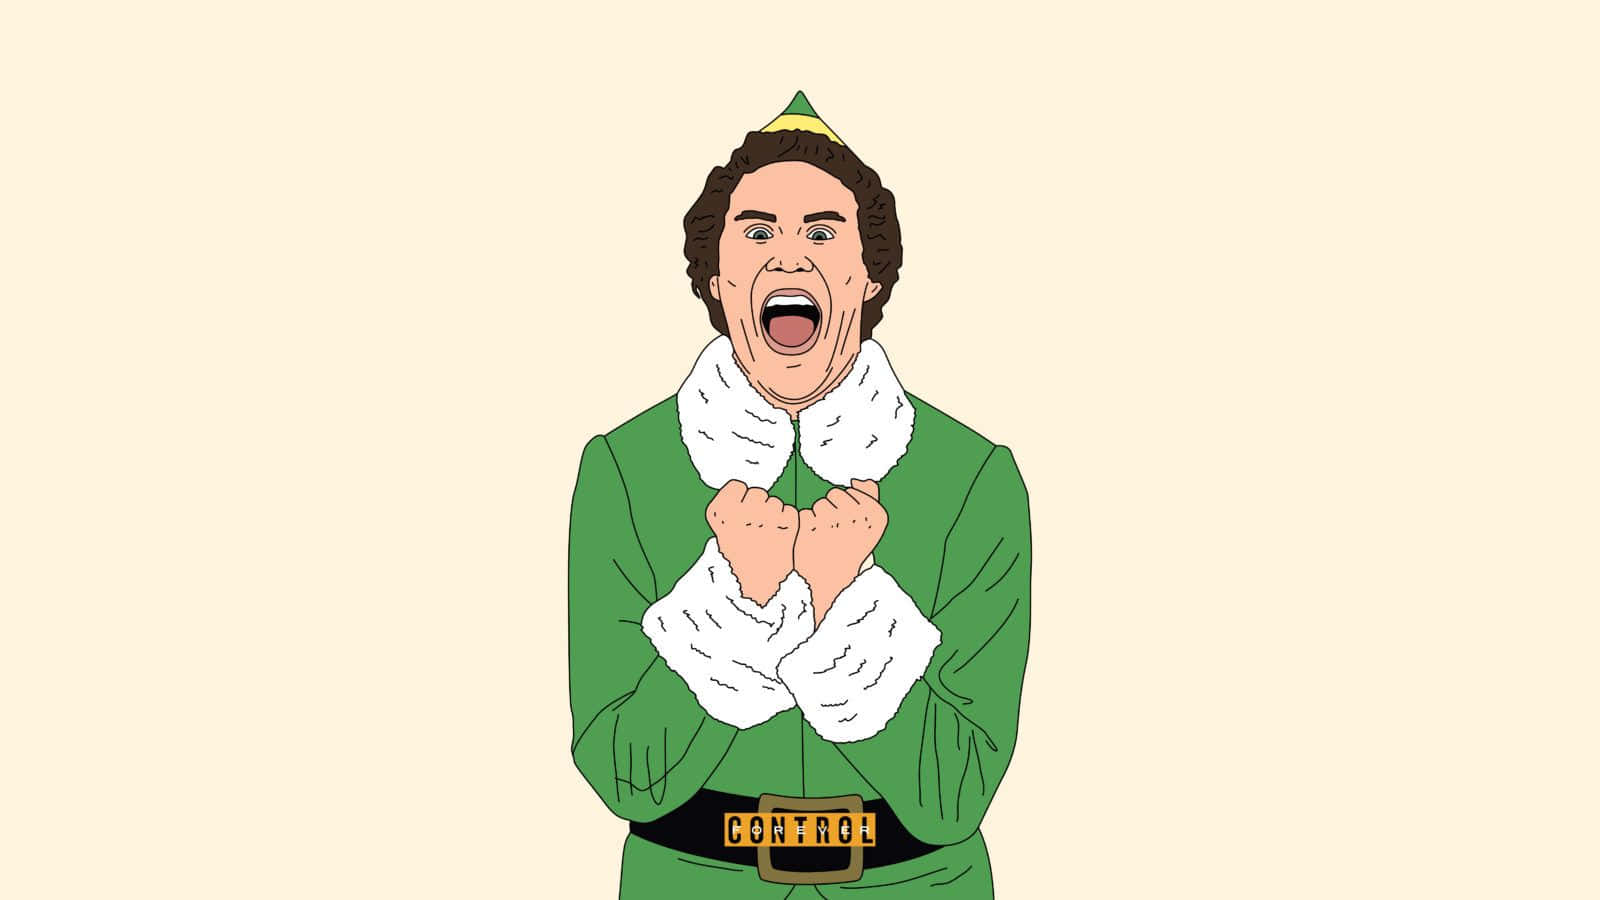 Buddy the Elf is proudly showing off his Christmas spirit Wallpaper